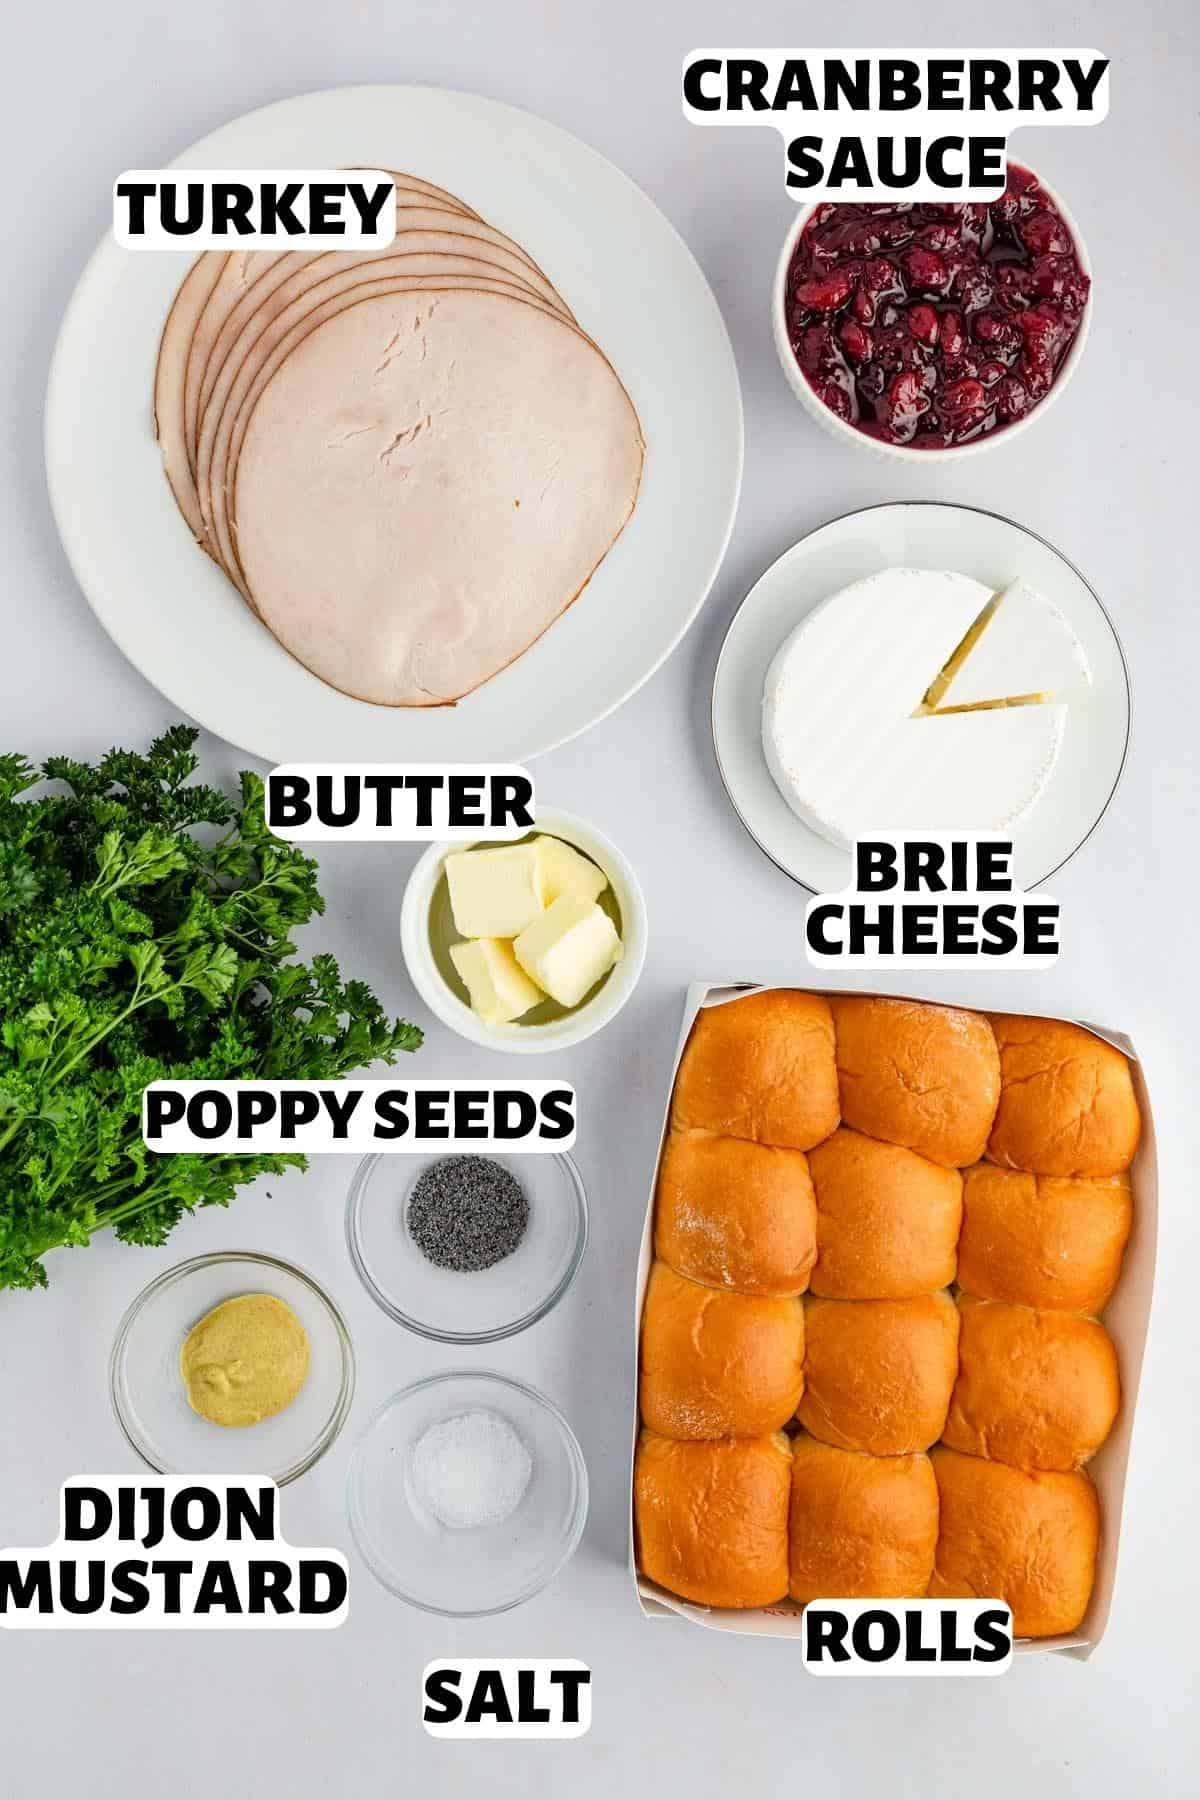 Image labeled with ingredients needed to make turkey cranberry sliders.